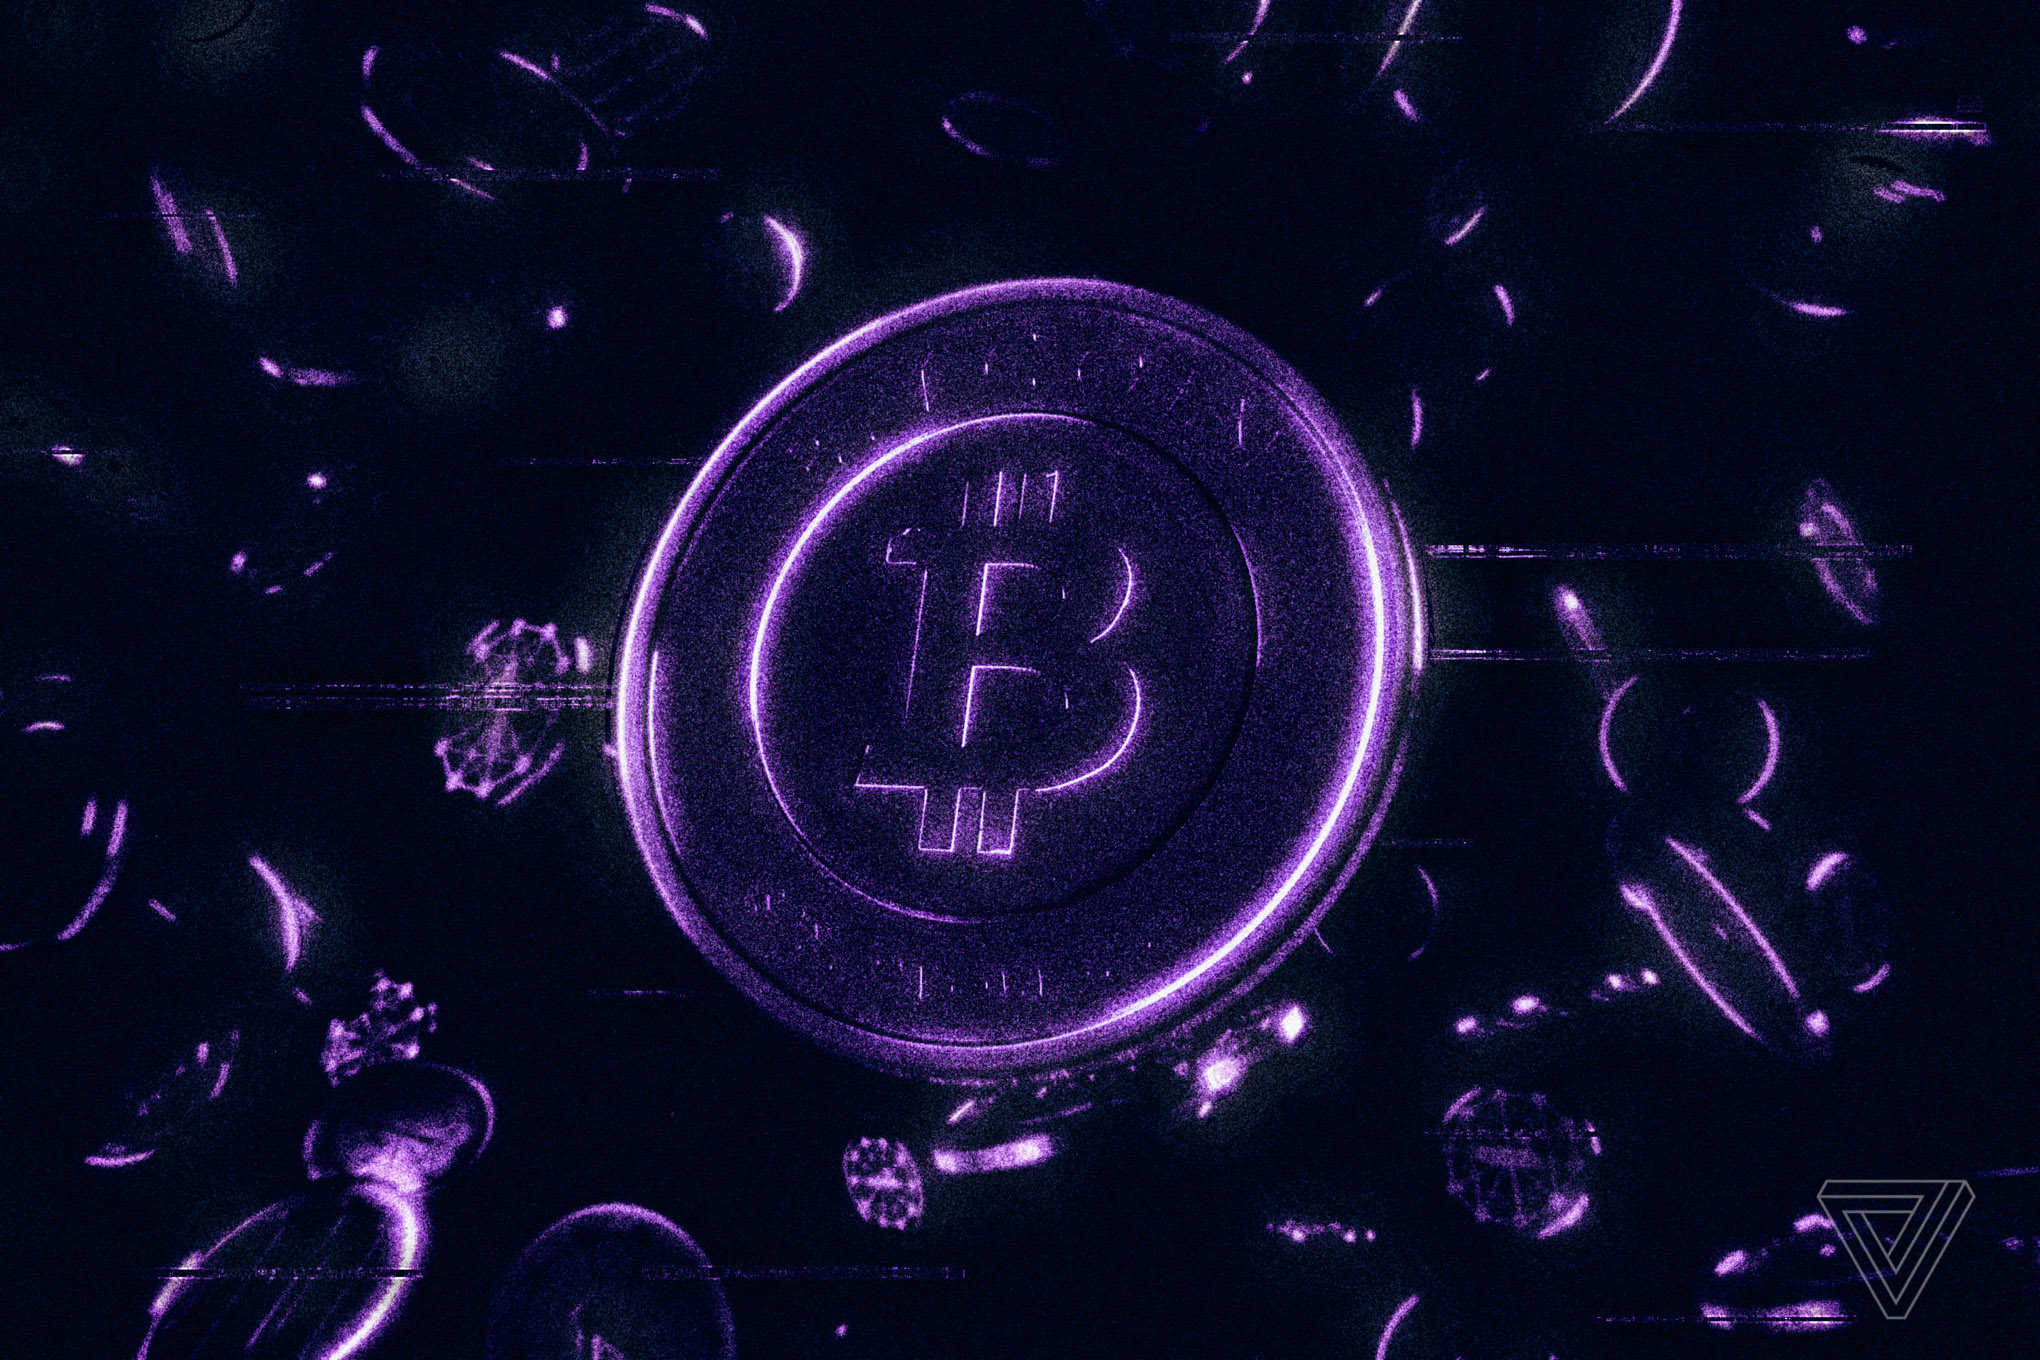 A stylized illustration of a Bitcoin in purple and black shadows.